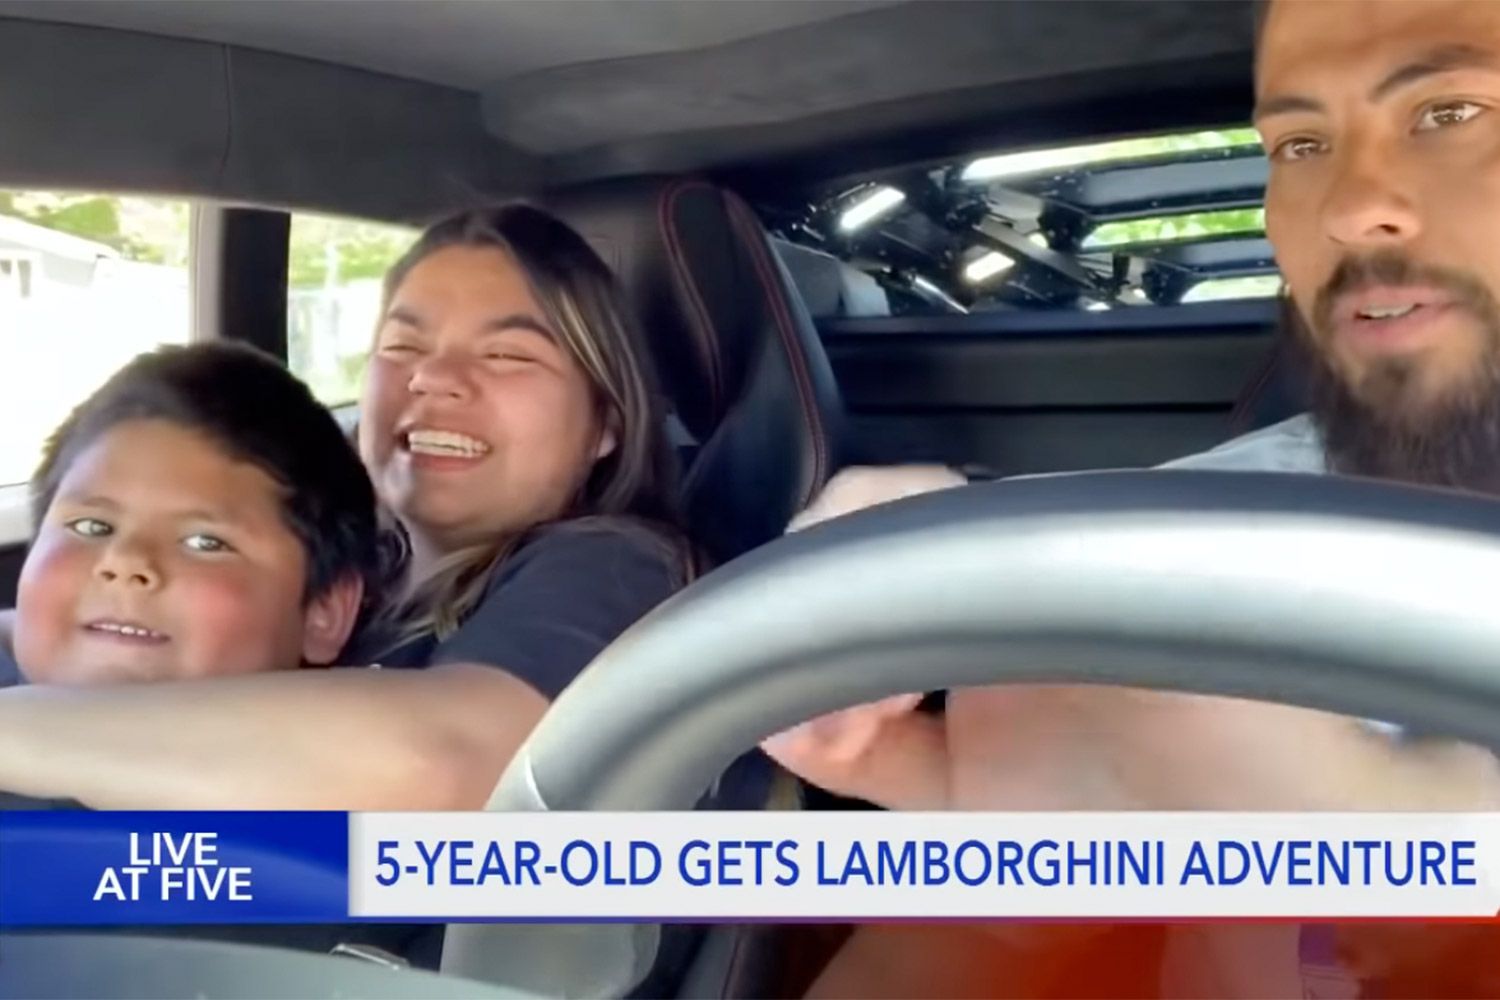 5-Year-Old Who Took Family Car Finally Gets to Ride in a Lamborghini